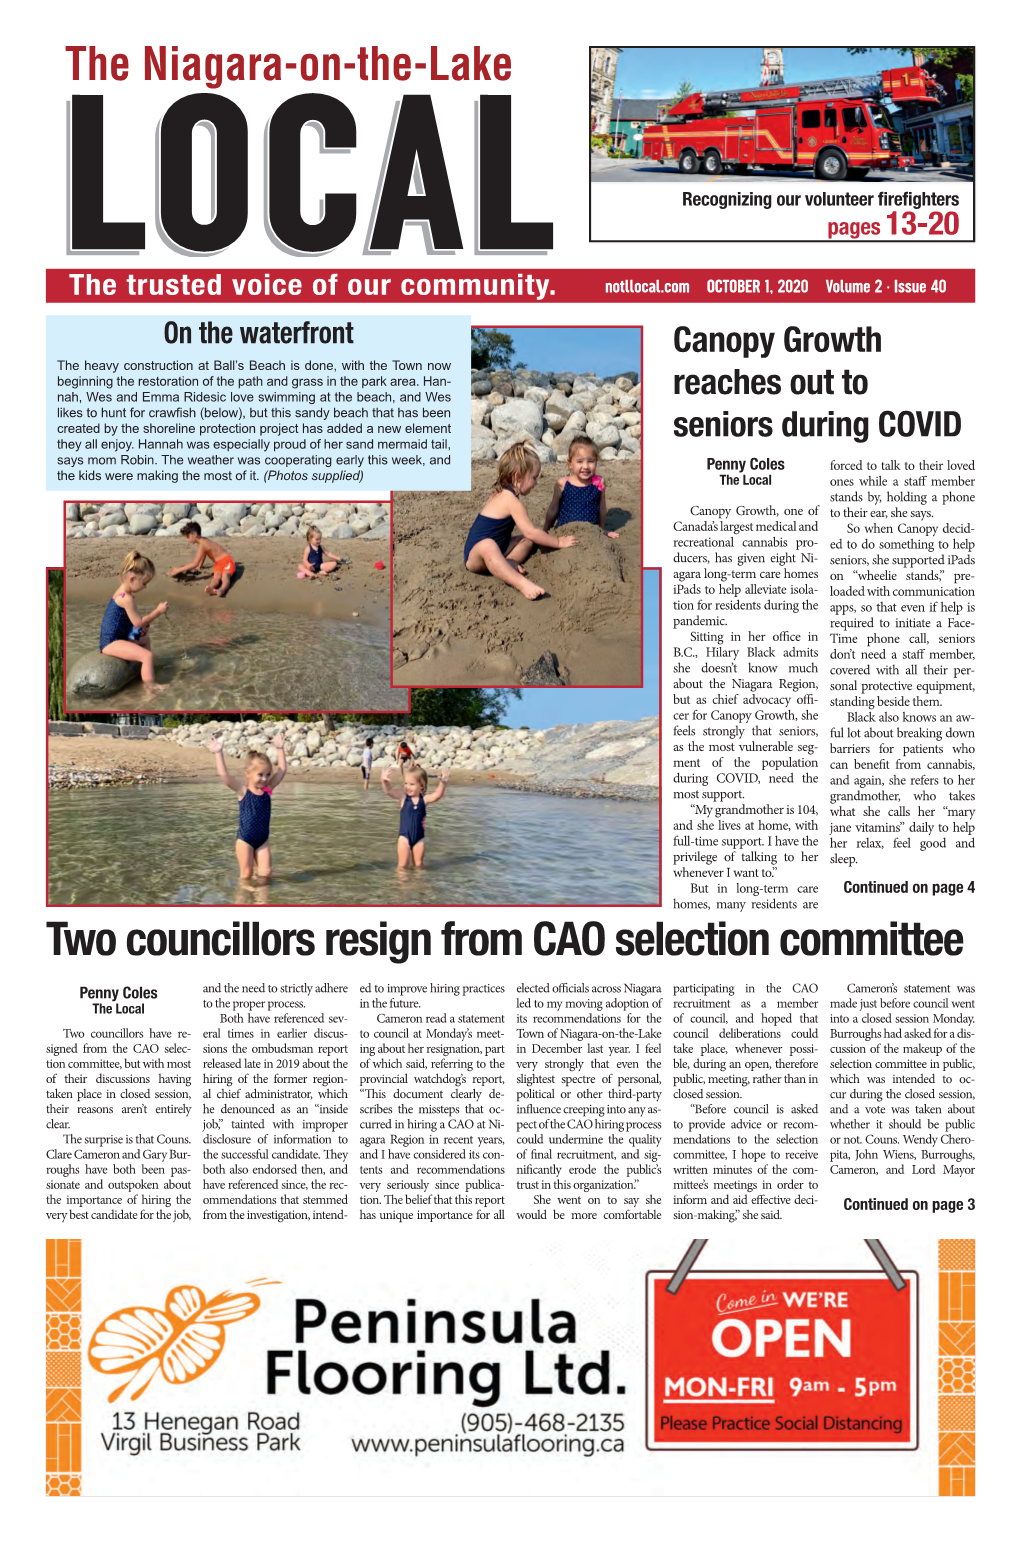 The Local, October 1, 2020